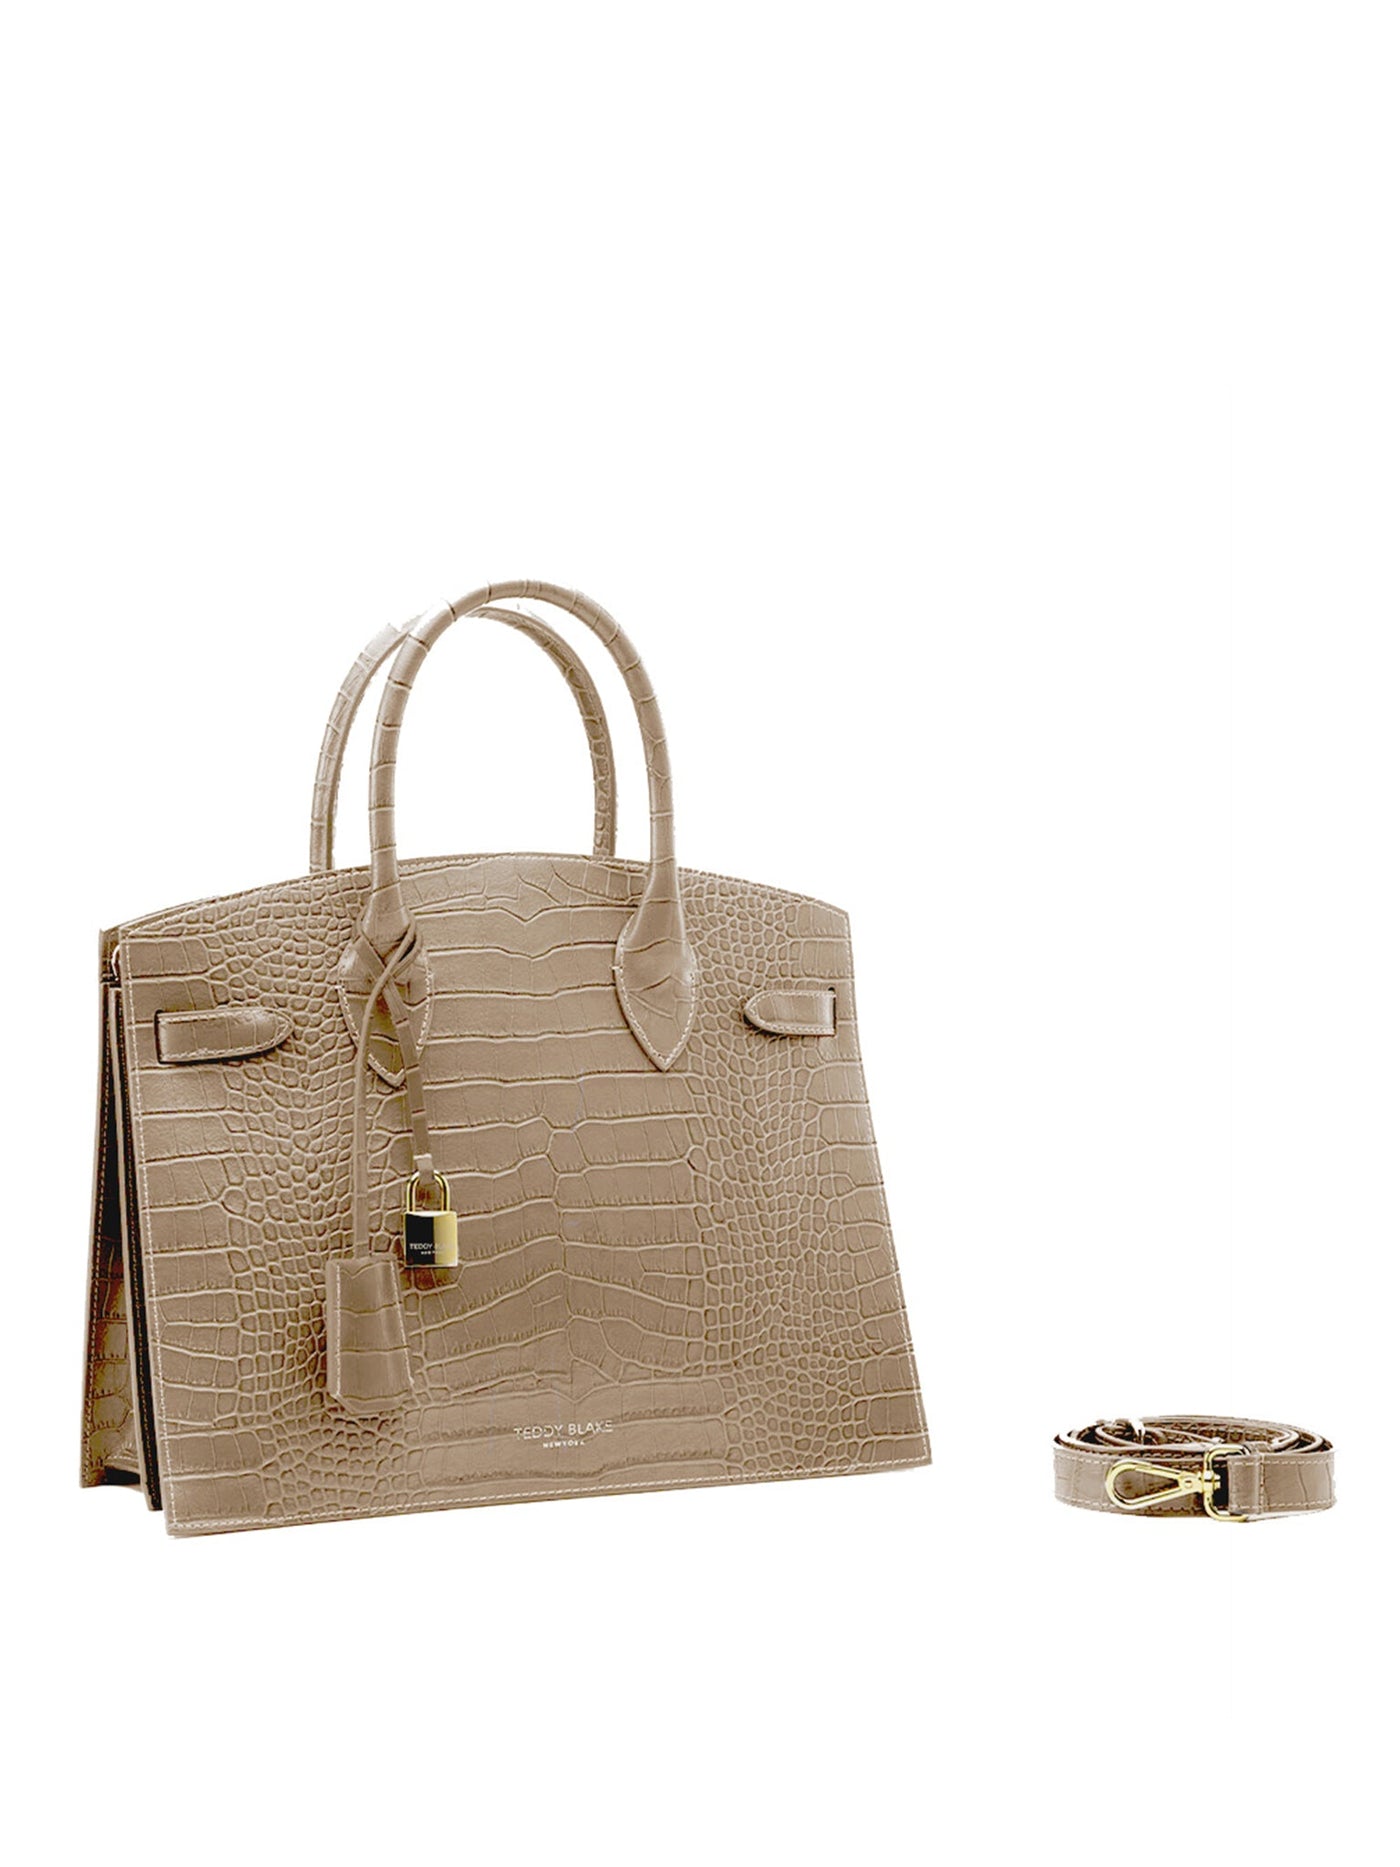 Suede Birkin  Bags, Fancy bags, Luxury bags collection